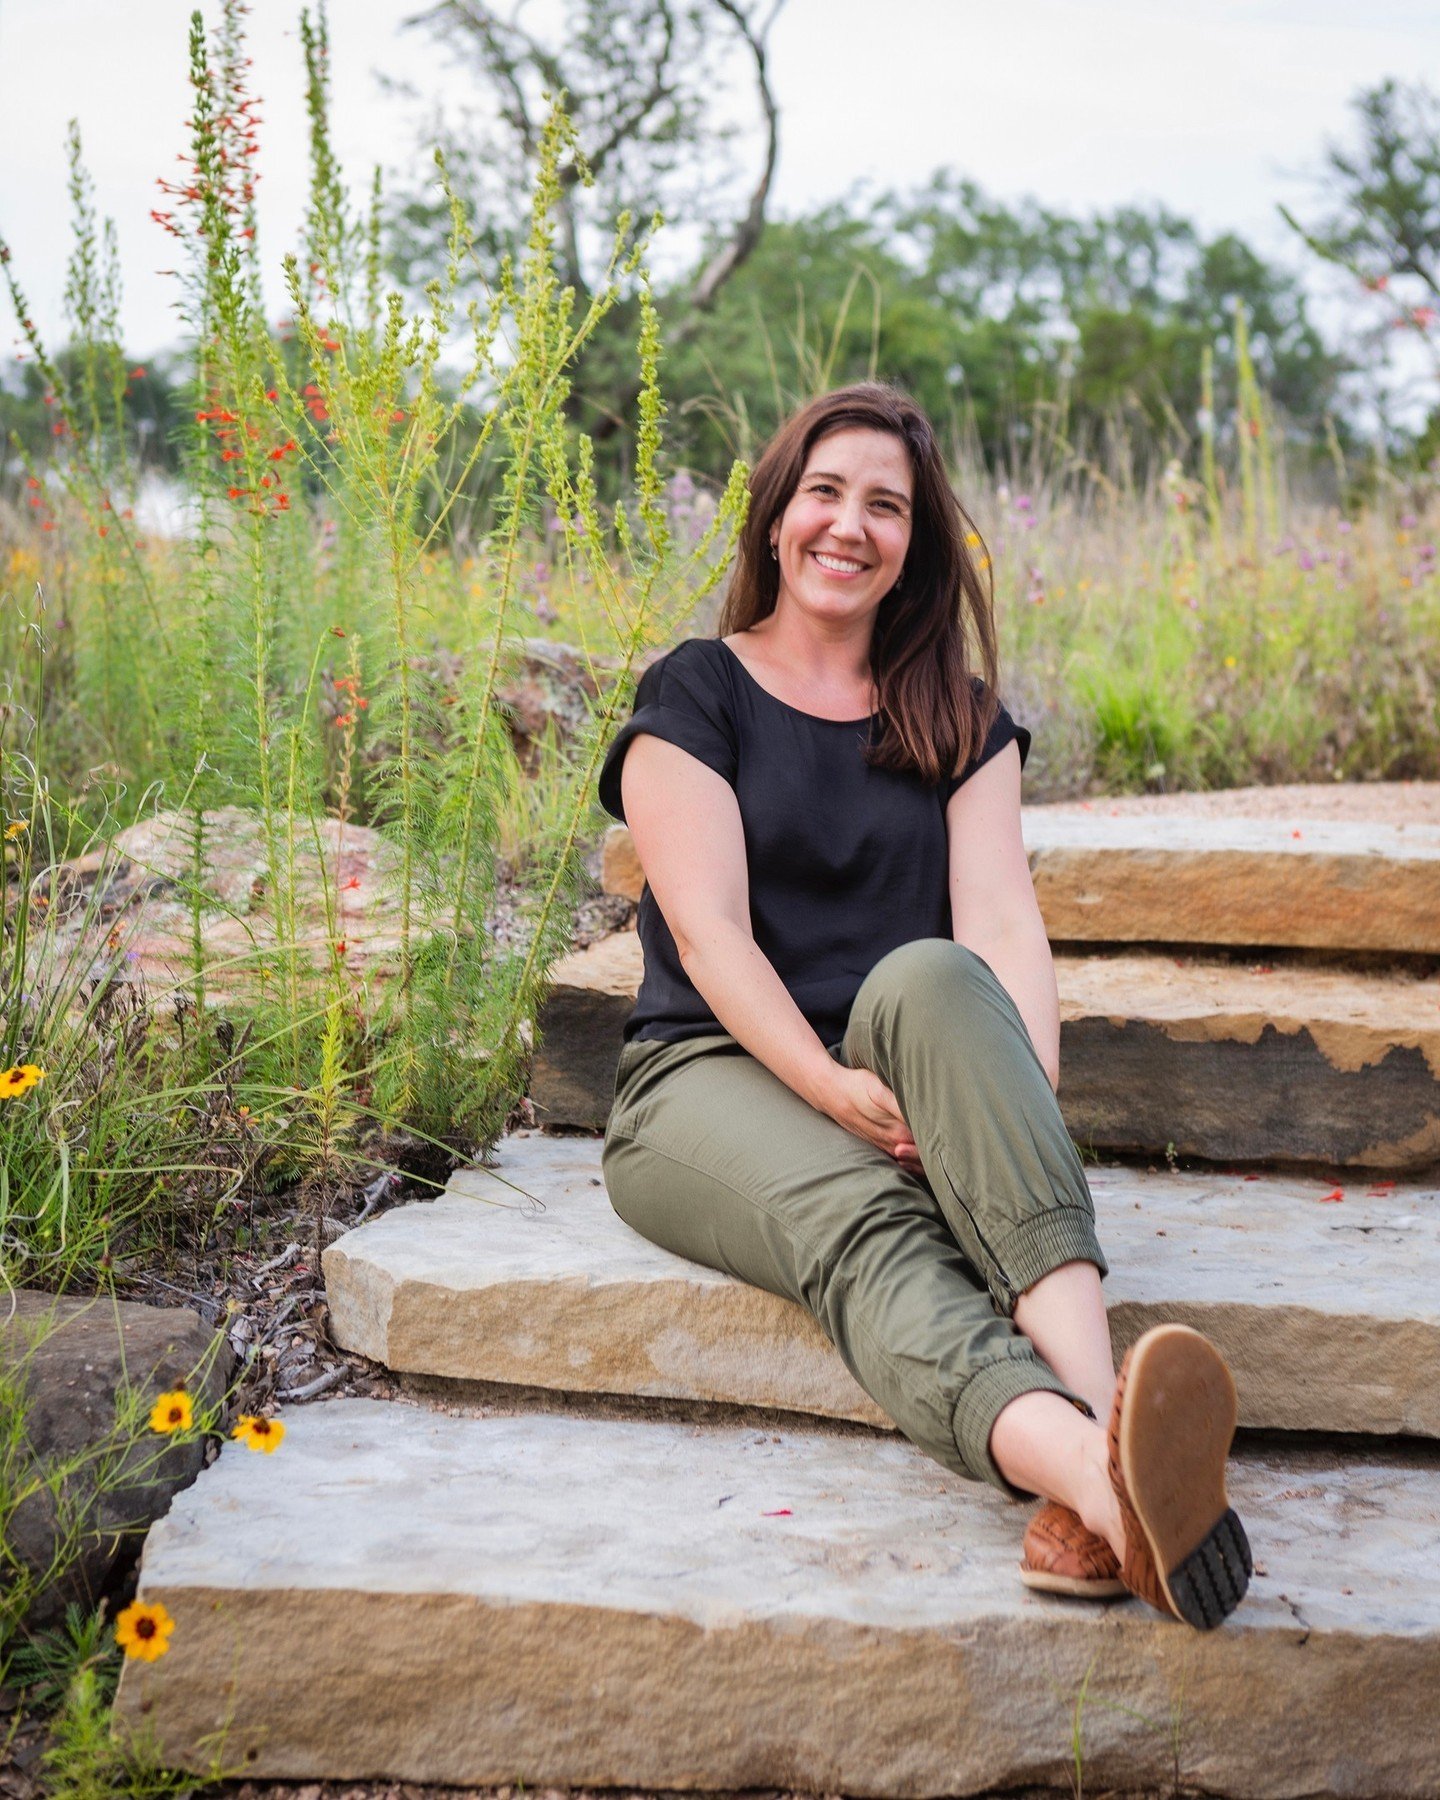 We want to take a moment to recognize a real cornerstone of the Twistleaf team, our Principal Landscape Architect Shannon Rogers. Originally from Dallas, Shannon brings a wealth of experience to her role. She holds a Bachelor of Landscape Architectur